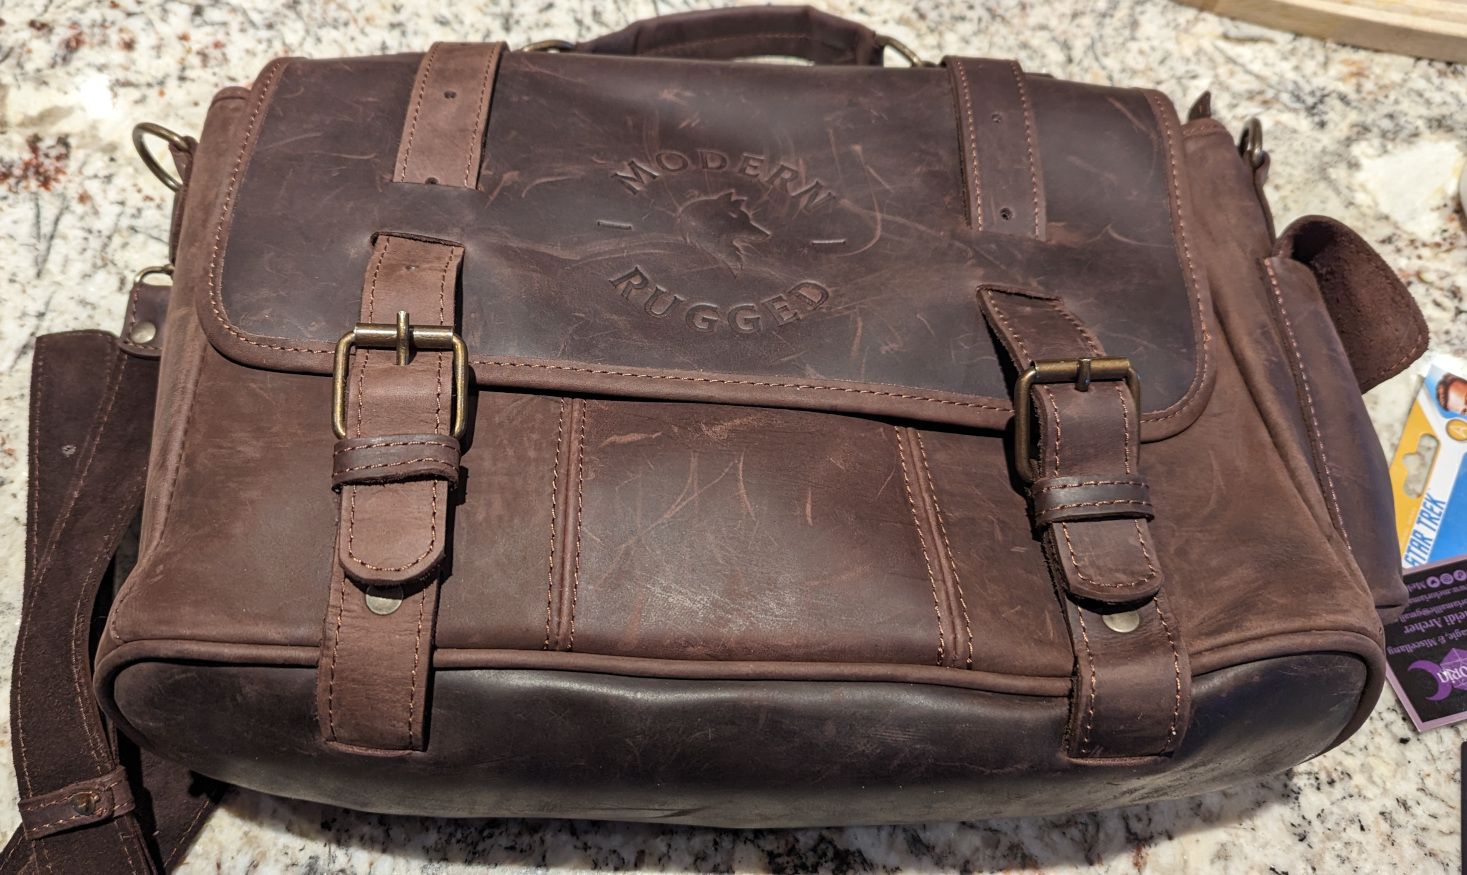 A nice leather bag to hold stuff.